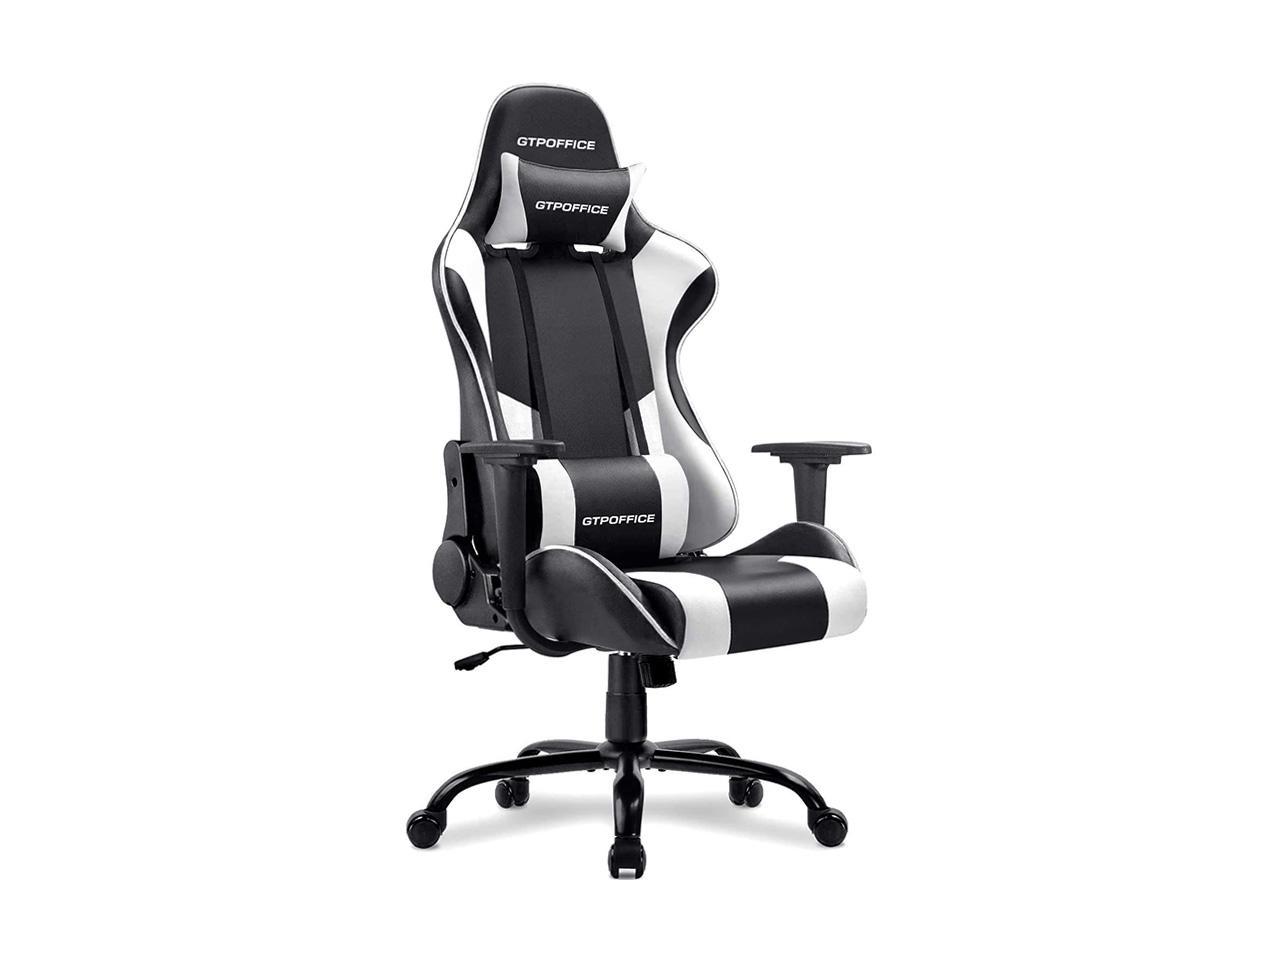 Gtracing Gaming Chair Racing Office Computer Chair Pu Leather Ergonomic Backrest And Seat Height Adjustable Recliner Swivel Rocker With Headrest And Lumbar Pillow E Sports Chair Black Walmart Canada